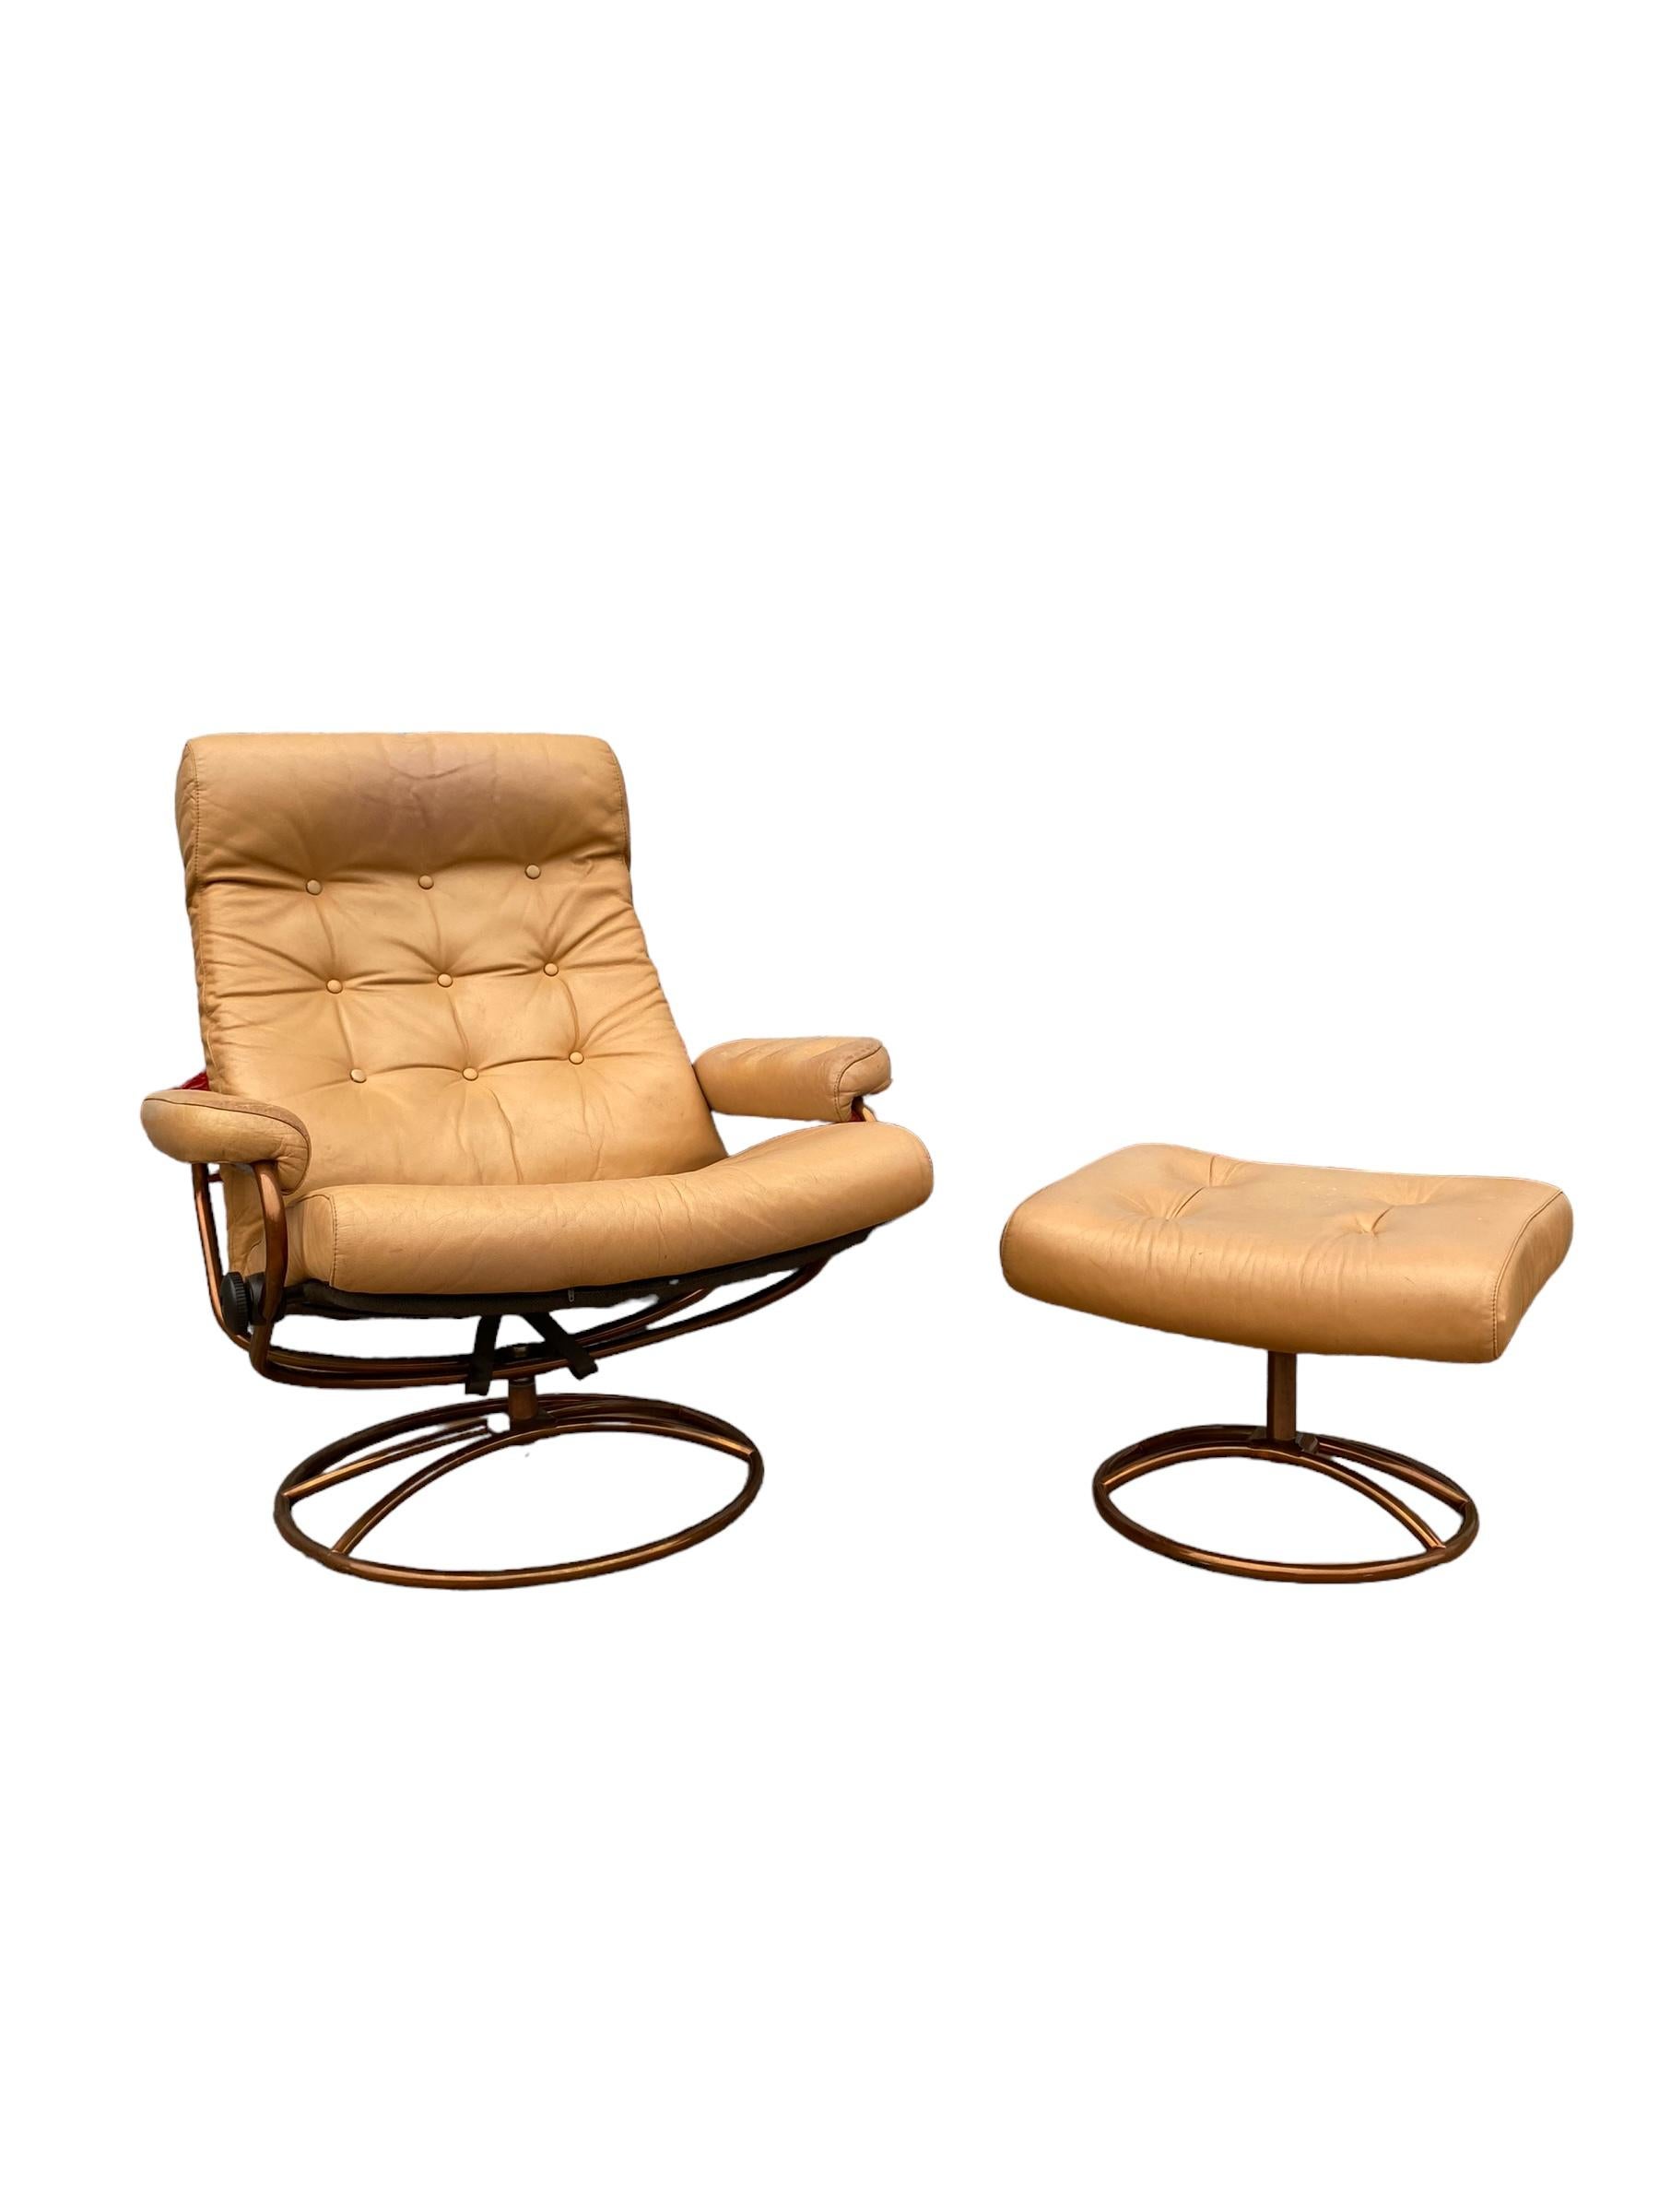 Leather Ekornes Stressless Reclining Lounge Chair and Ottoman in Cream with Copper Frame For Sale